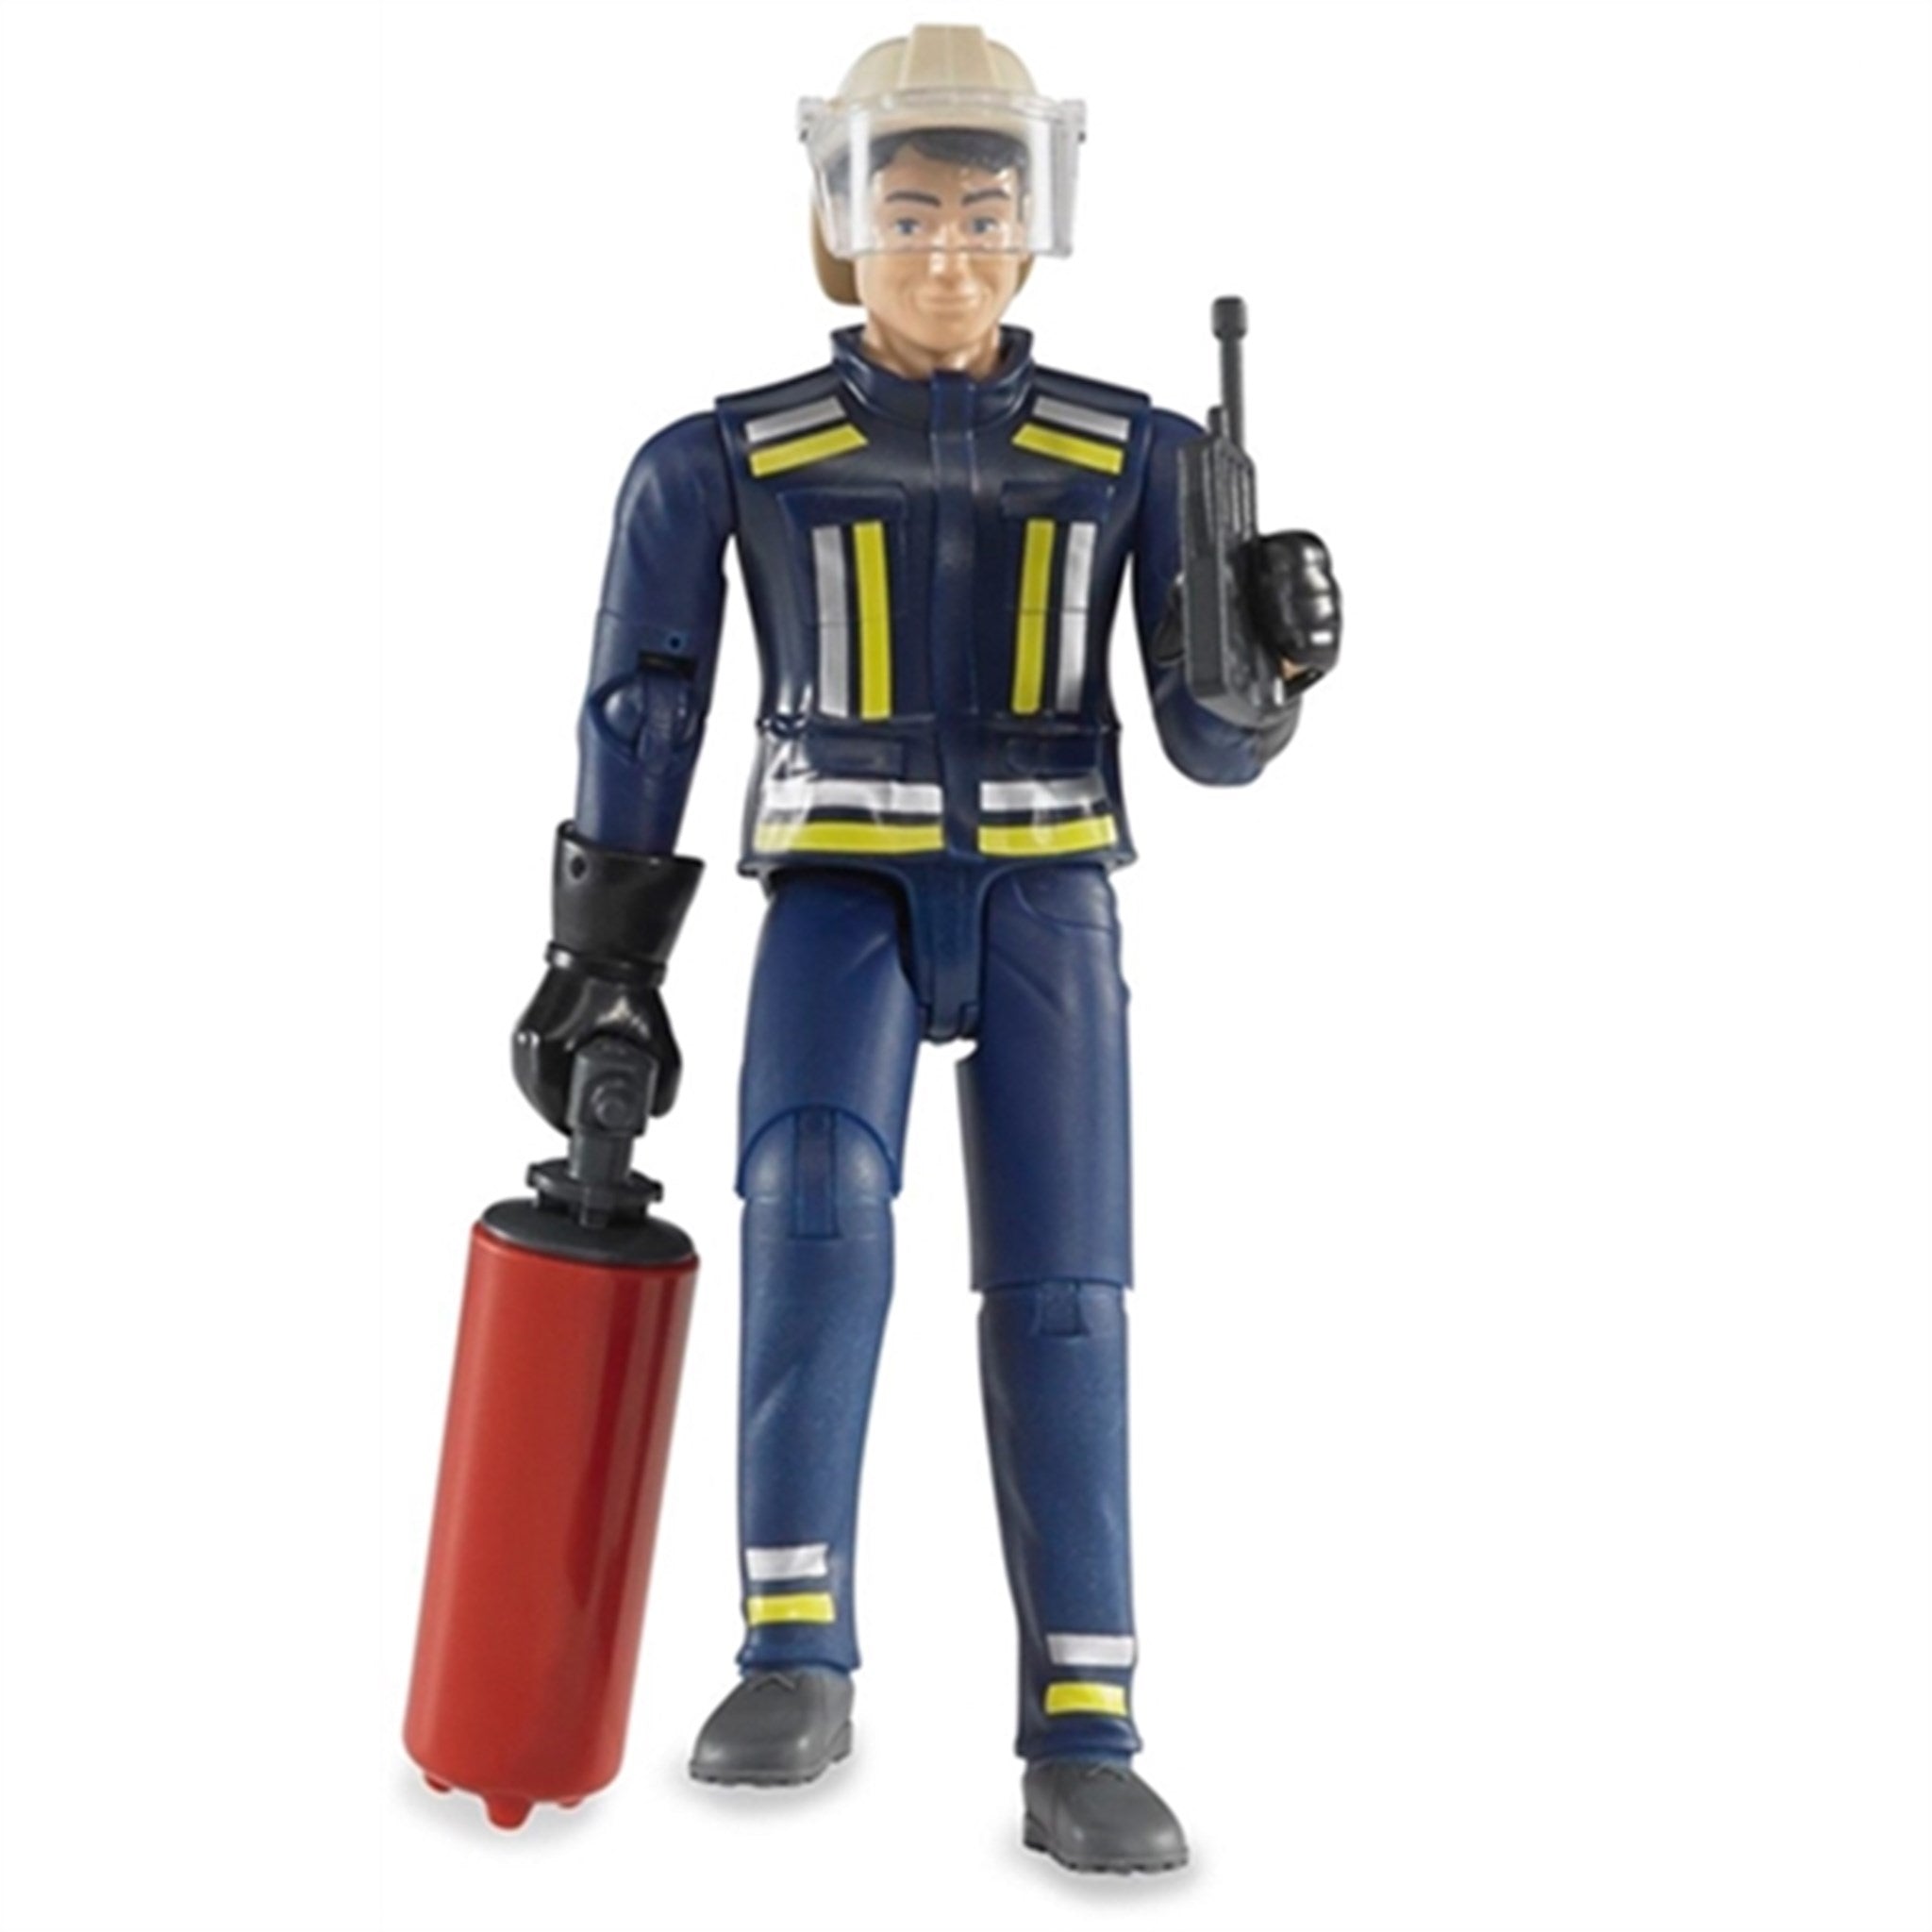 Bruder Bworld Fireman with Accessories